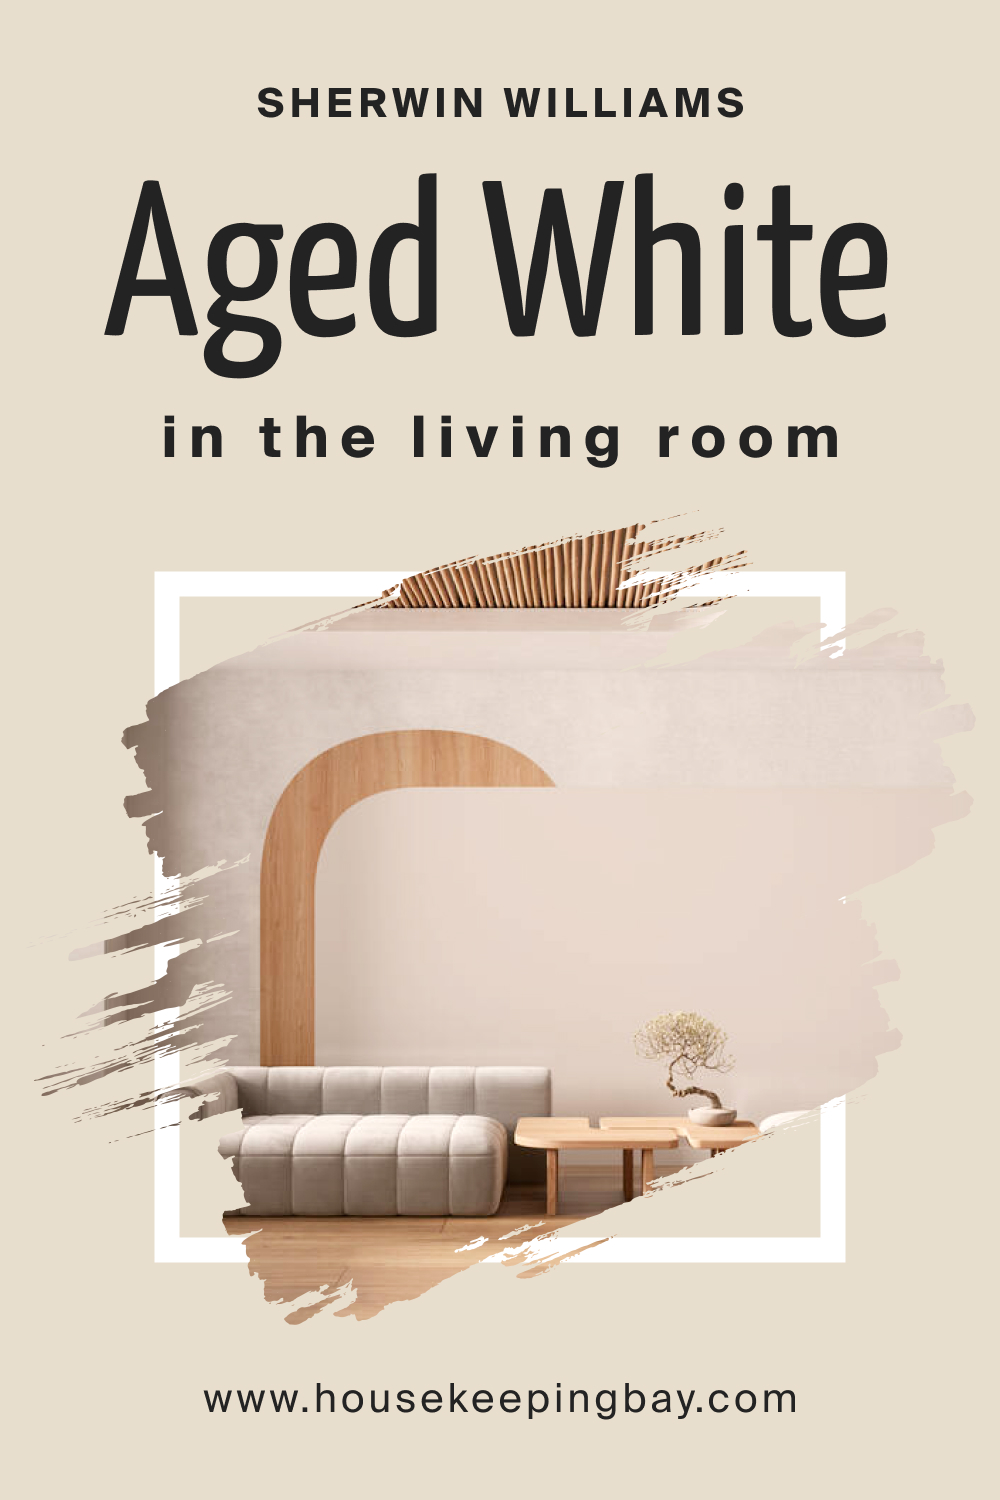 Sherwin Williams. SW Aged White In the Living Room